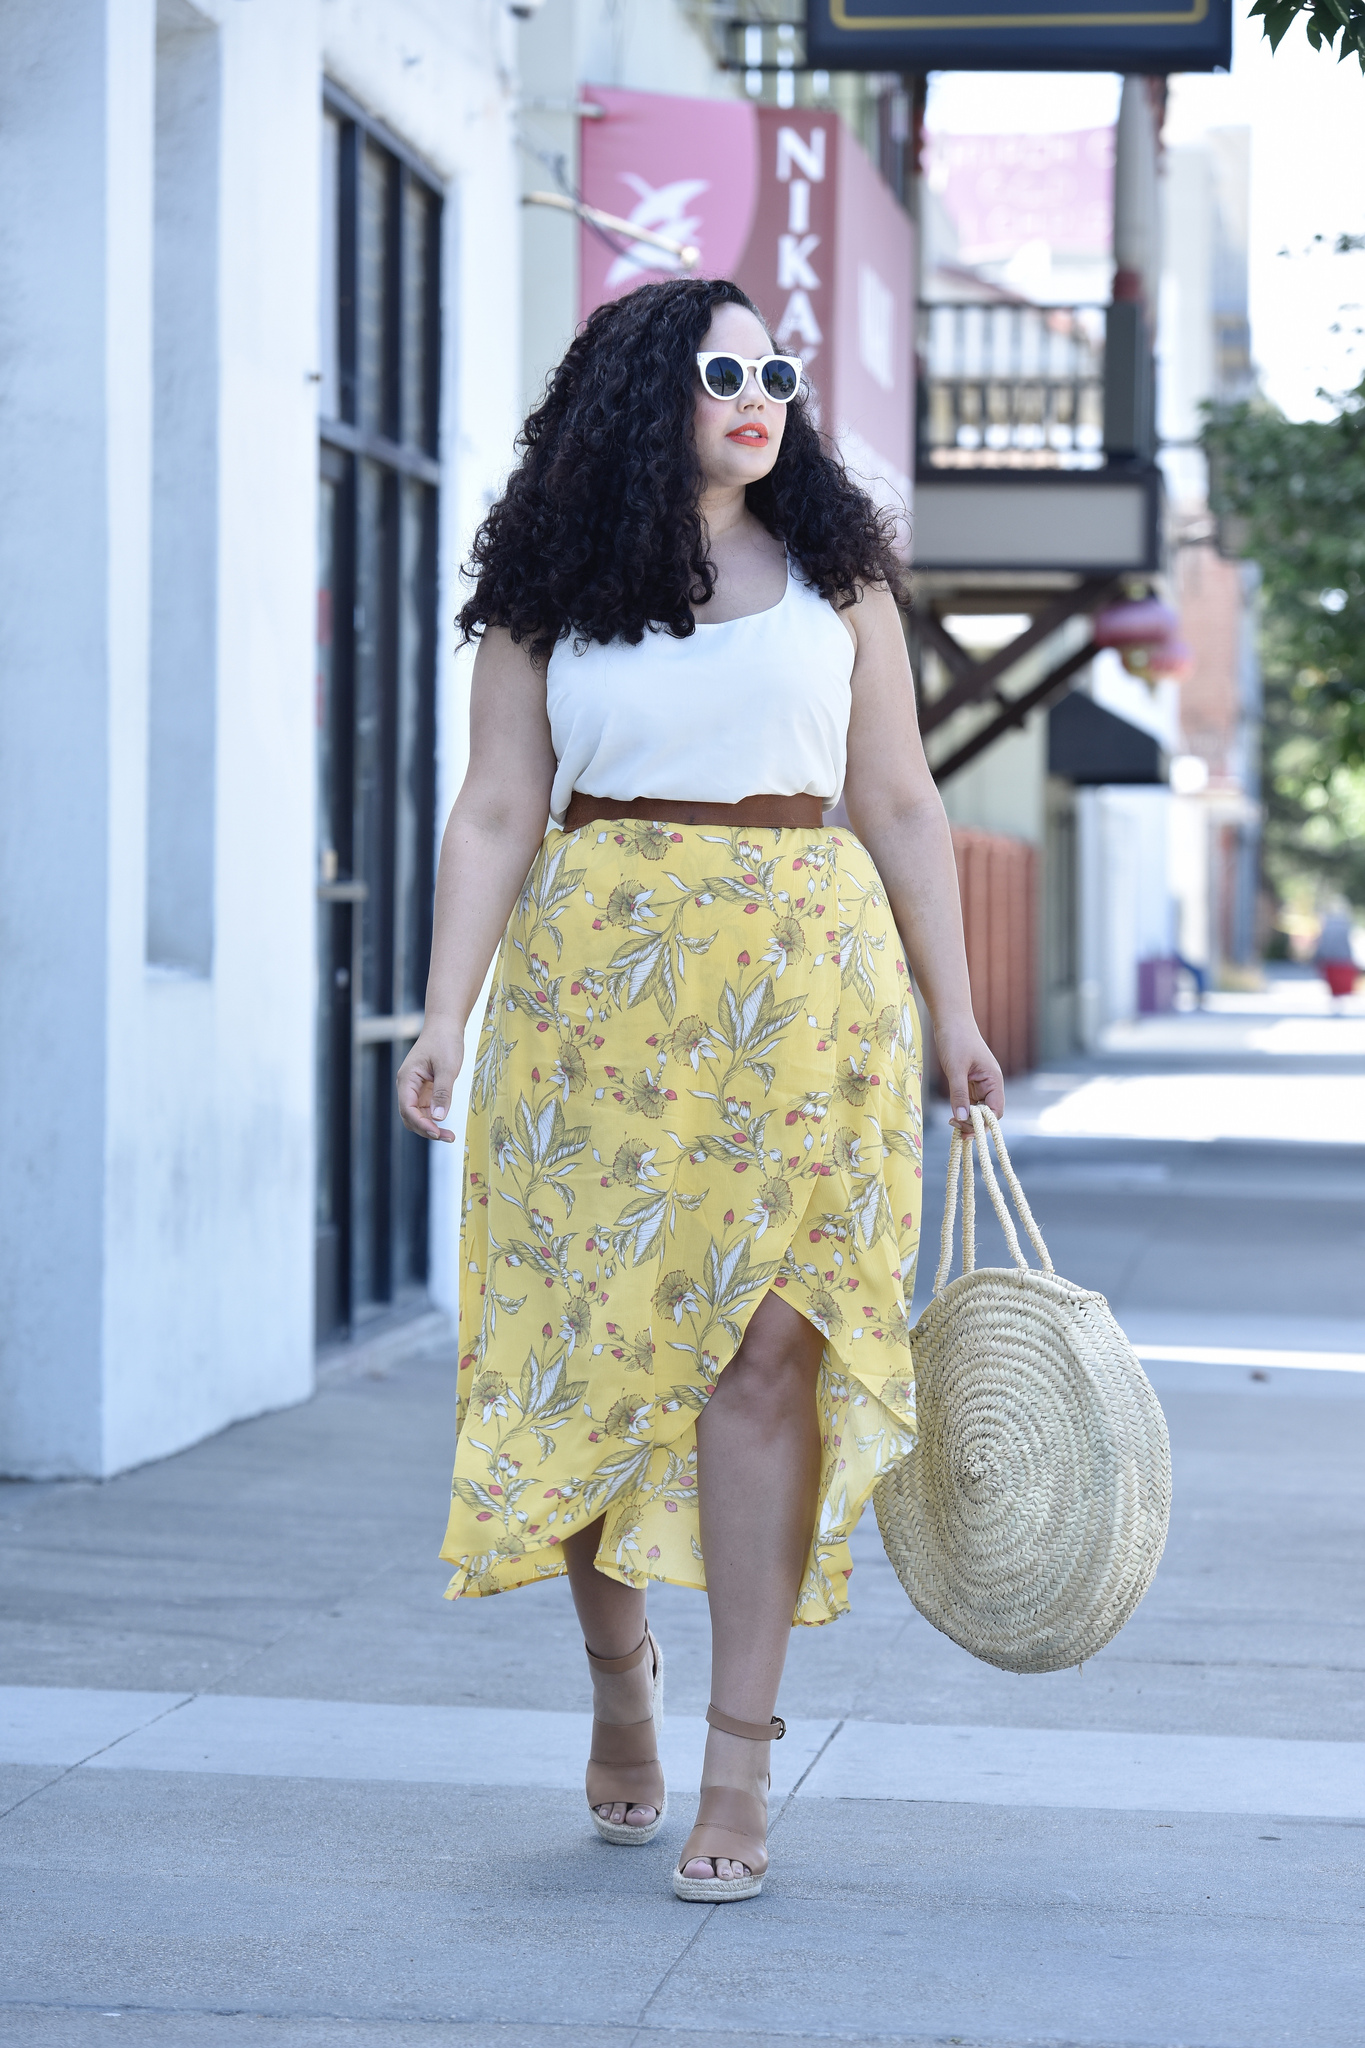 Top 10 Looks Of 2018 Via @GirlWithCurves #stylish #bloger #plussize #beauty #chic #summer #spring #fall #winter #skinnyjeans